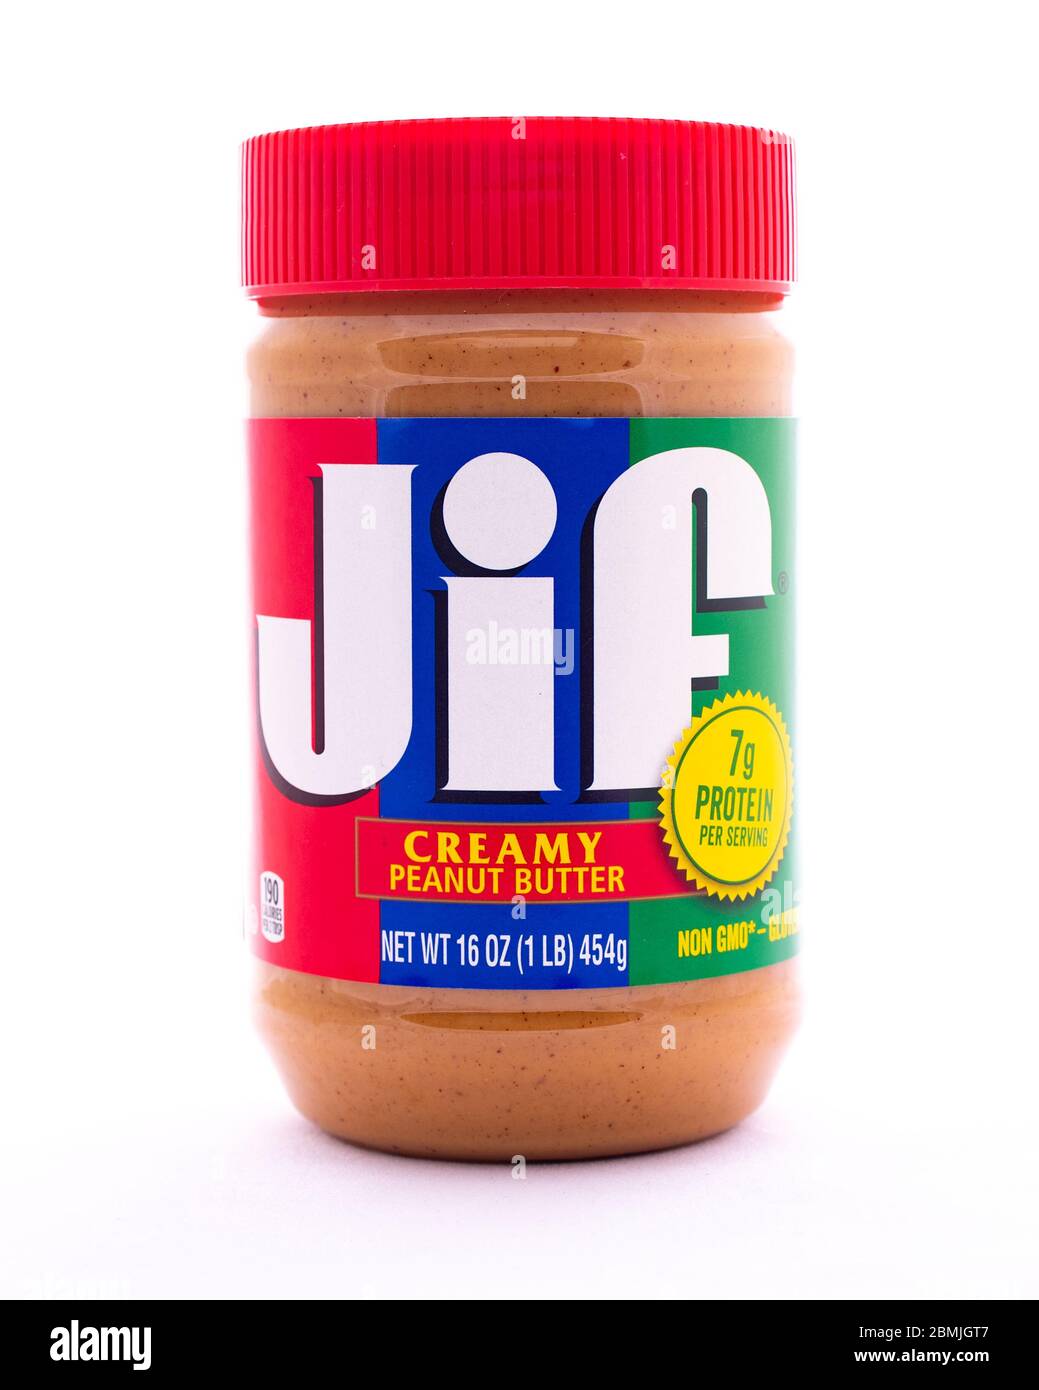 A 16 oz. jar of Jif Creamy Peanut Butter, a staple source of protein and a favorite food. Stock Photo